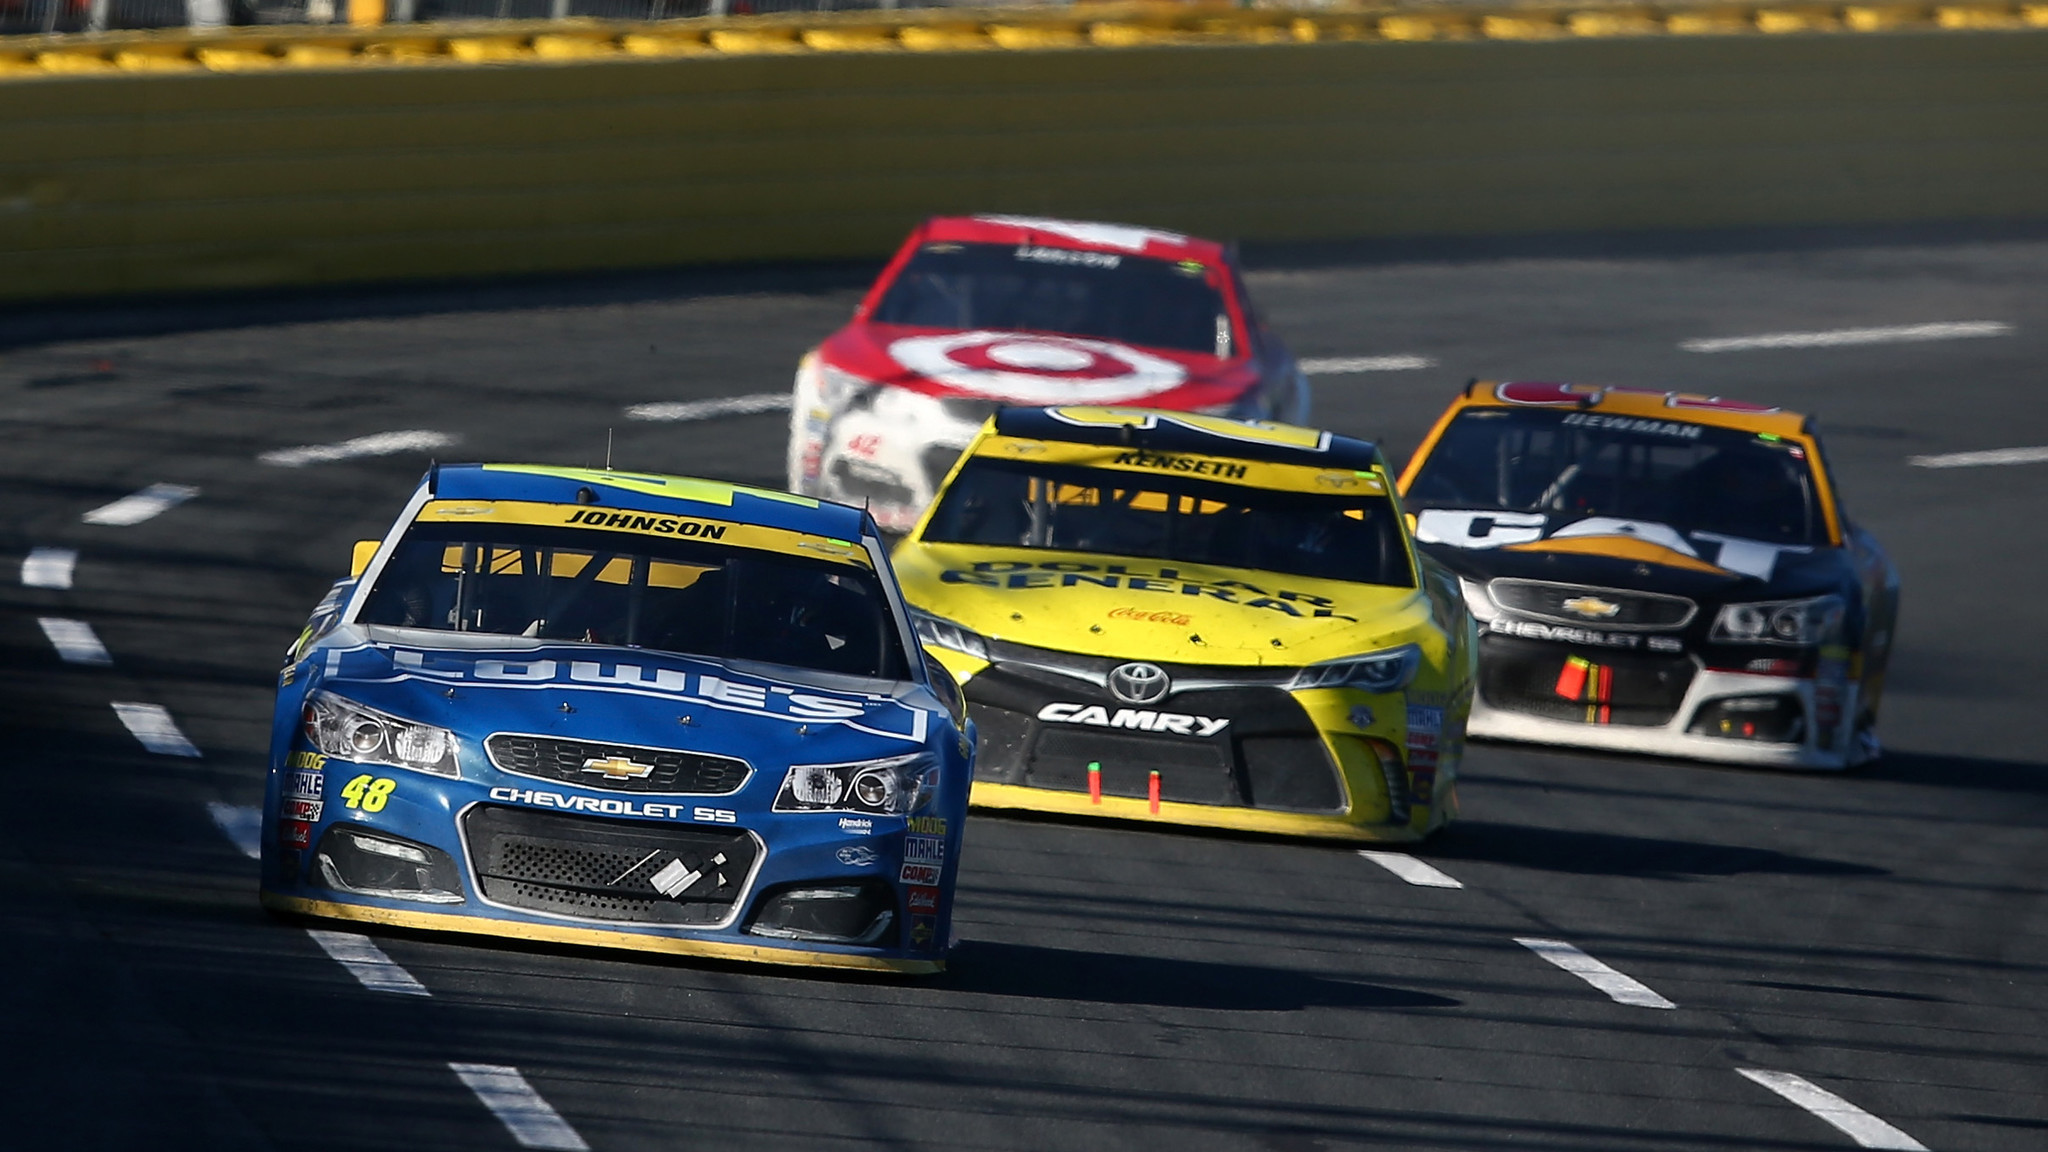 2048x1152 Jimmie Johnson advances to next round of Sprint Cup playoffs with win at  Concord - LA Times